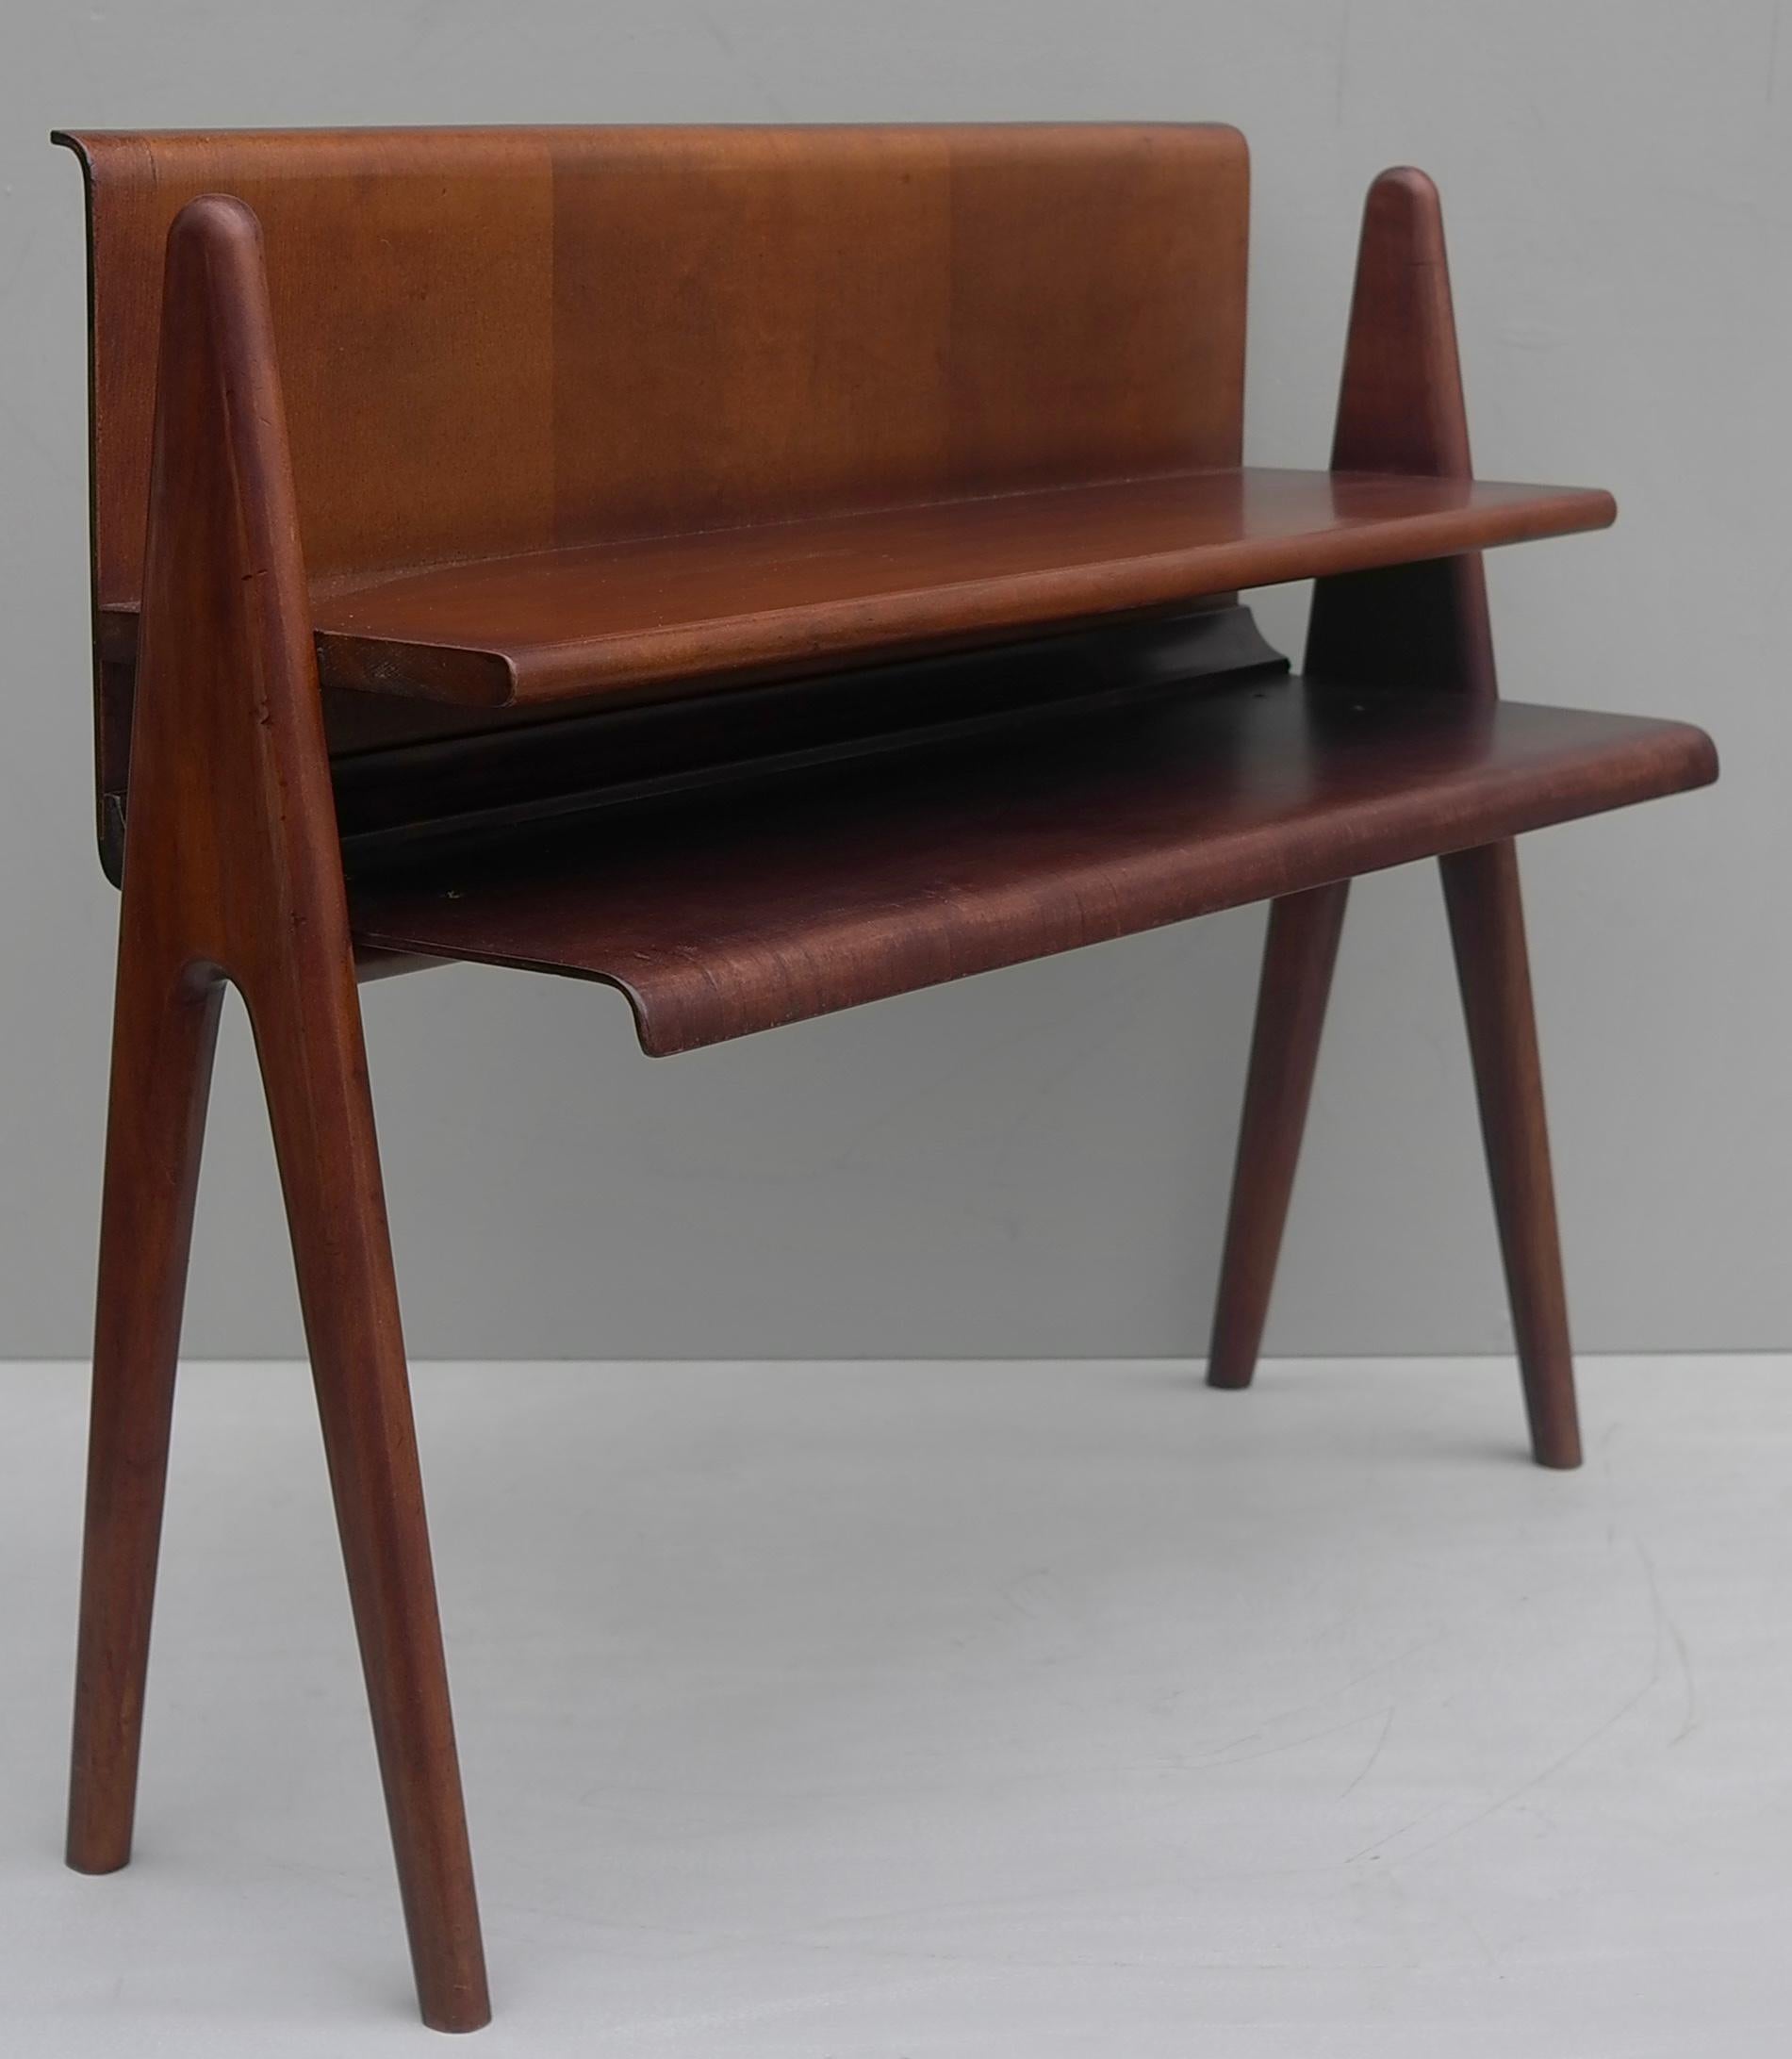 Italian Cesare Lacca Curved Walnut Plywood Side Table or Book Stand, Italy, 1950s For Sale